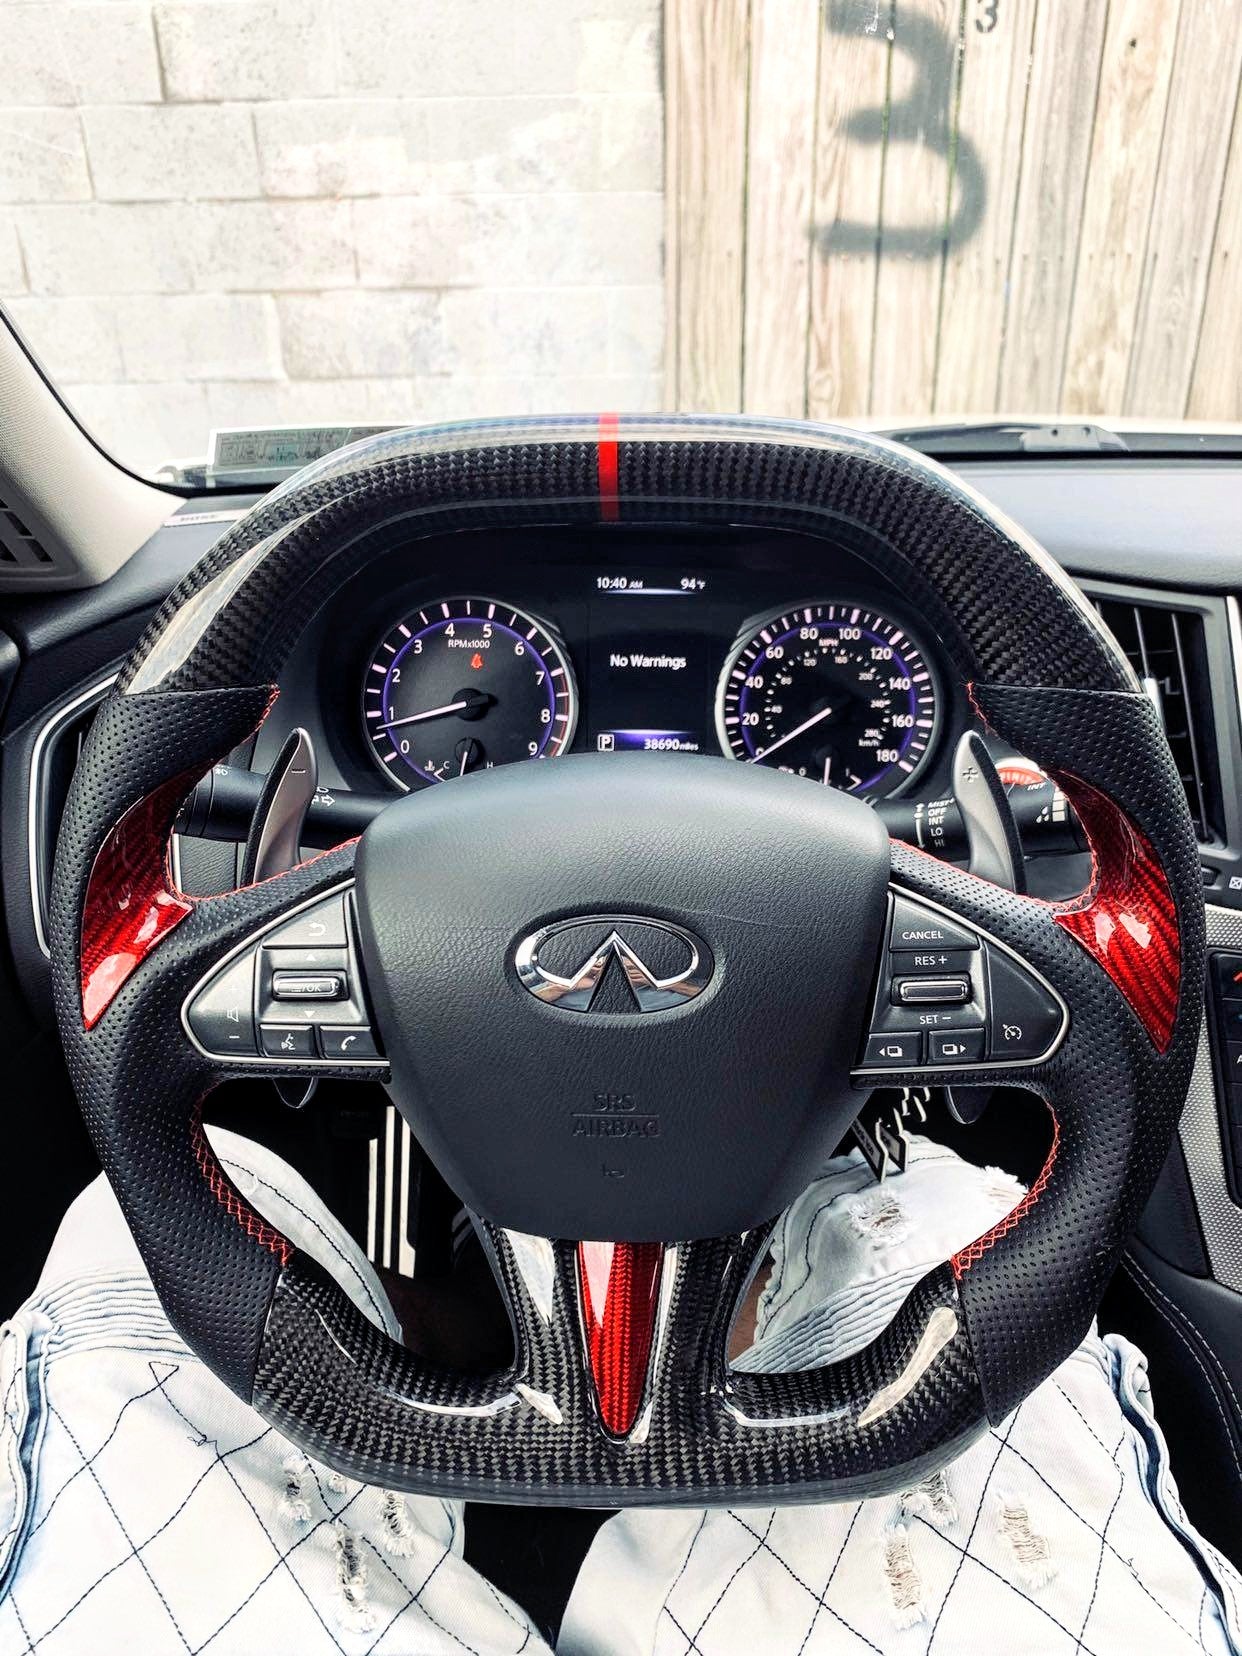 Racecar-inspired oval/rectangle CarbonFiber Steering Wheel for Infiniti Q50 2014-2017, featuring red accents, dark carbon fiber design, and a bold red stripe.